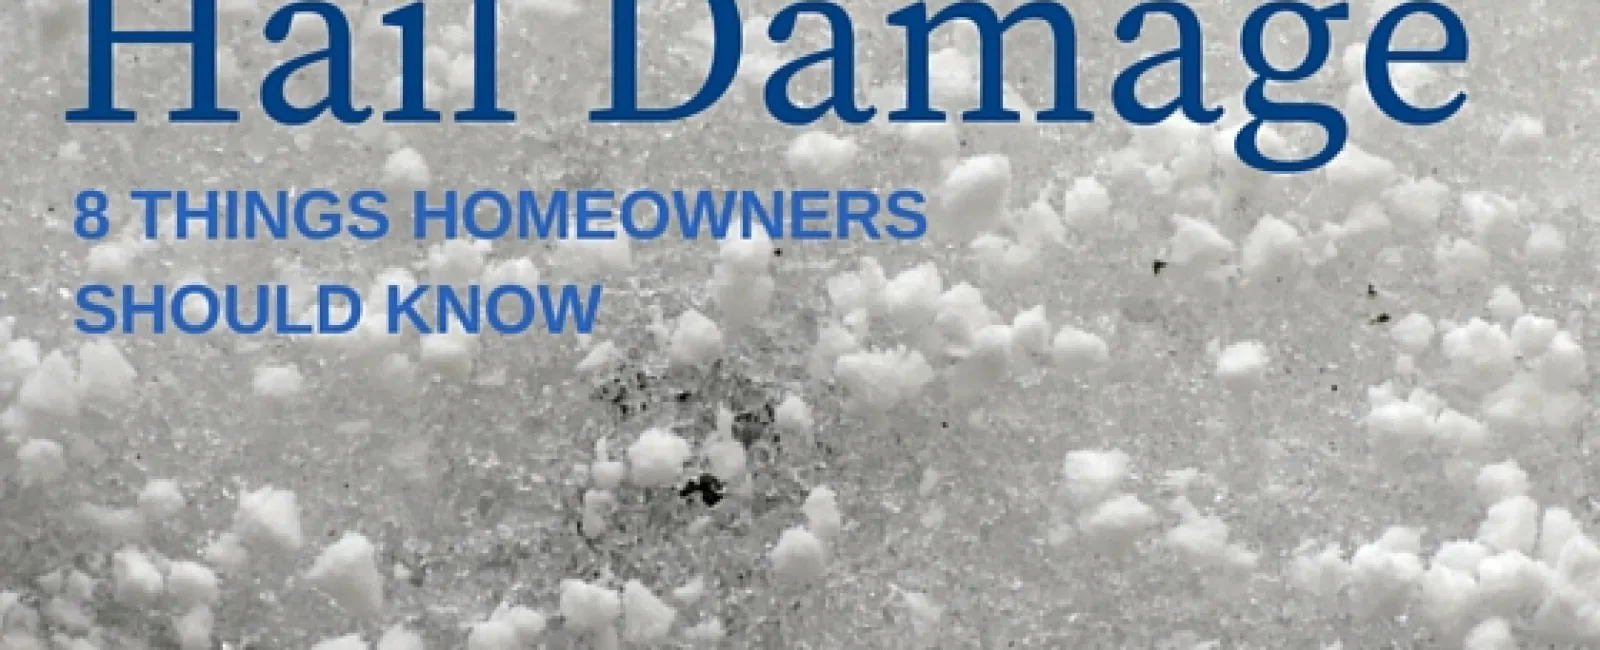 HAIL DAMAGED ROOF? 8 THINGS HOMEOWNERS MUST KNOW